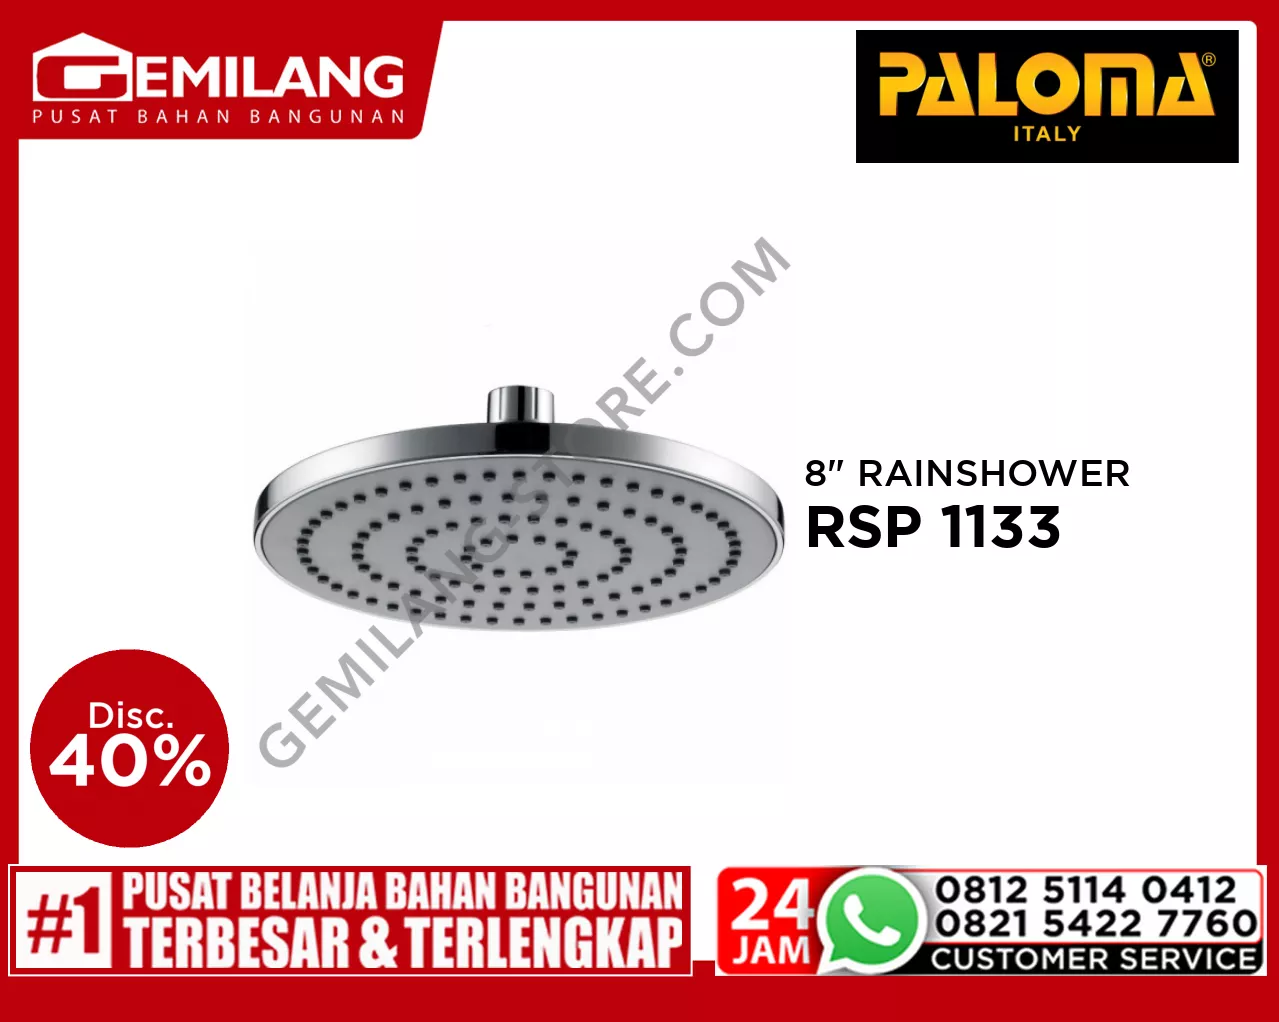 PALOMA 8inch RAINSHOWER AIR-INJECTION ROUND CHROME RSP 1133